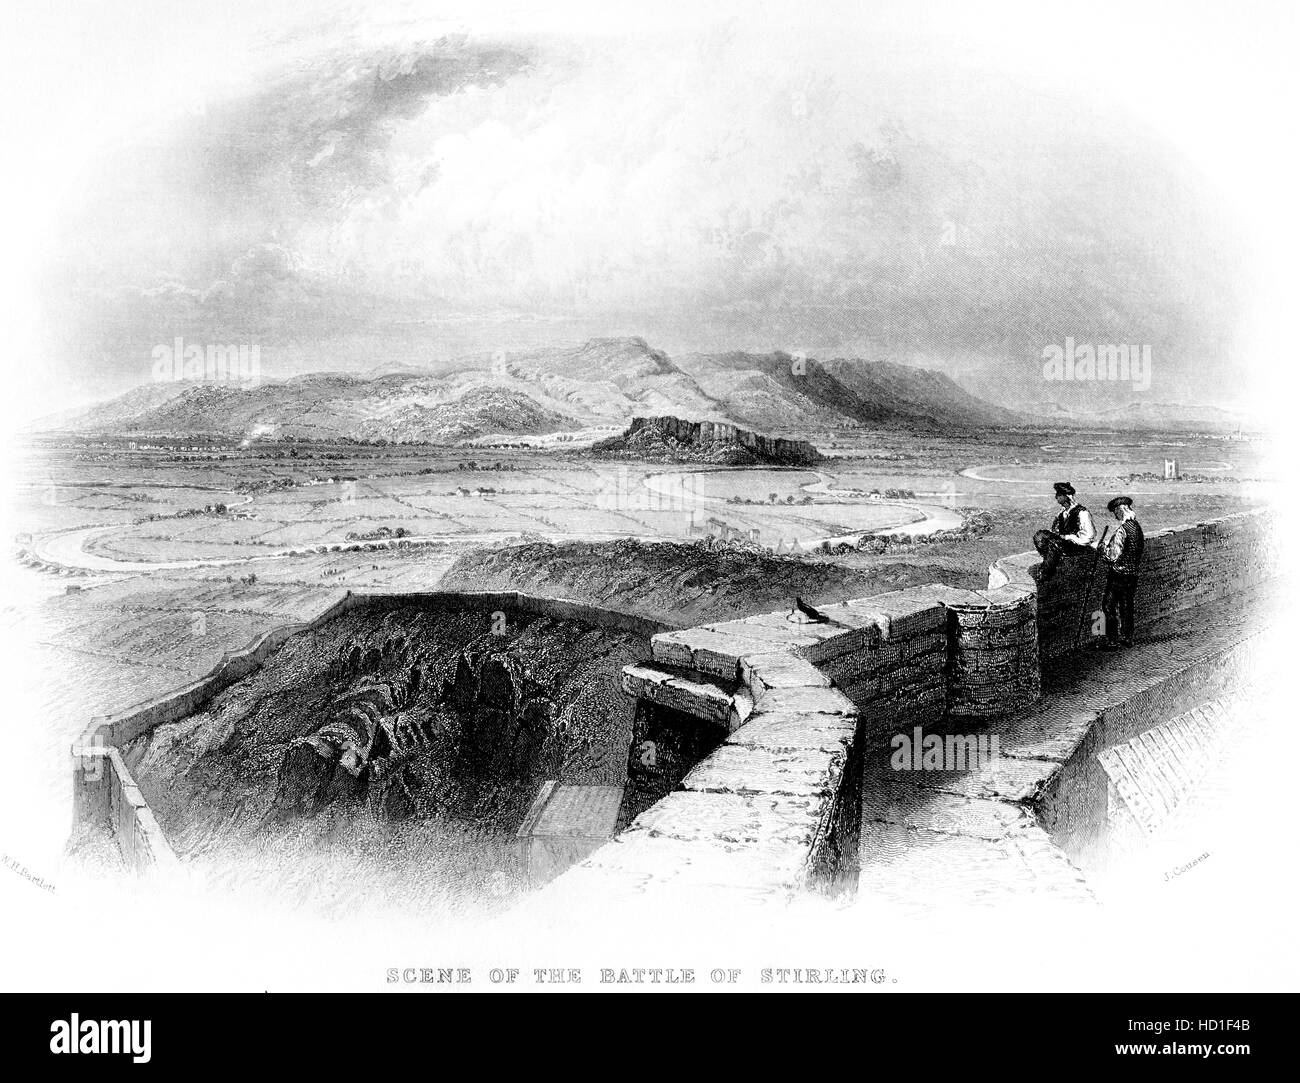 An engraving of the Scene of the Battle of Stirling scanned at high resolution from a book printed in 1859. Believed copyright free. Stock Photo